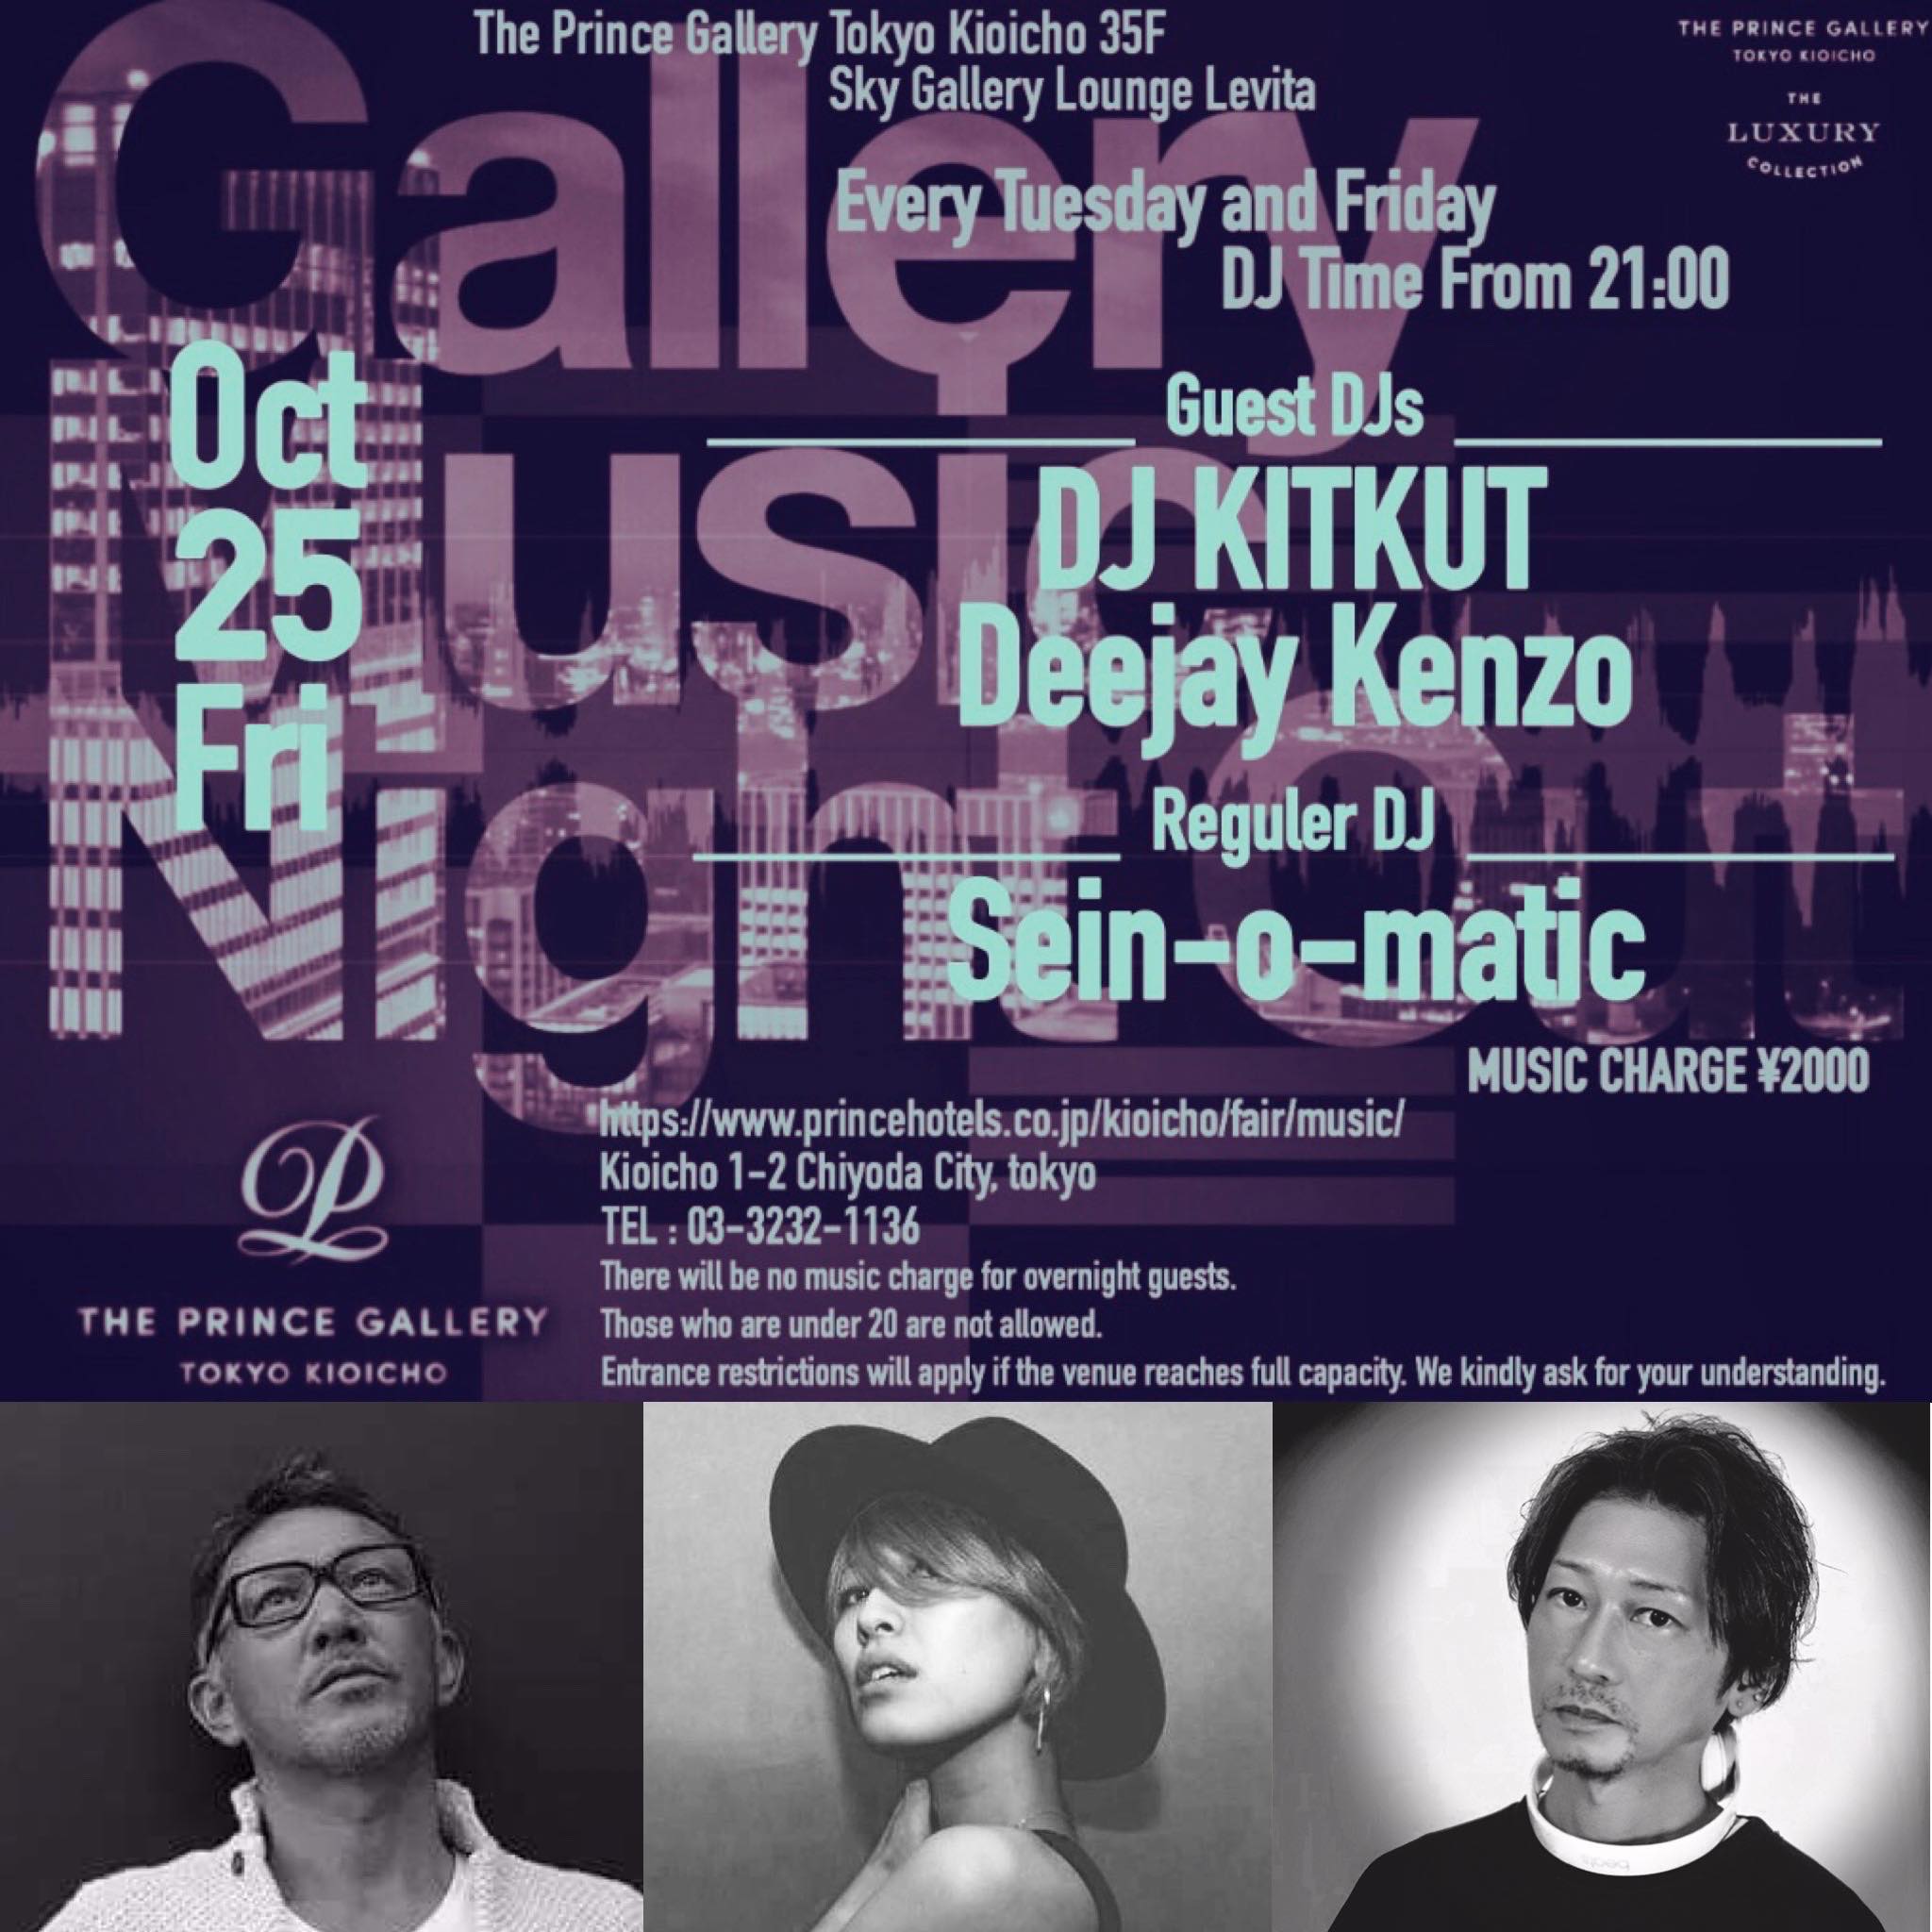 2019/10/25(fri) Gallery Music Night Out @ The Prince Gallery